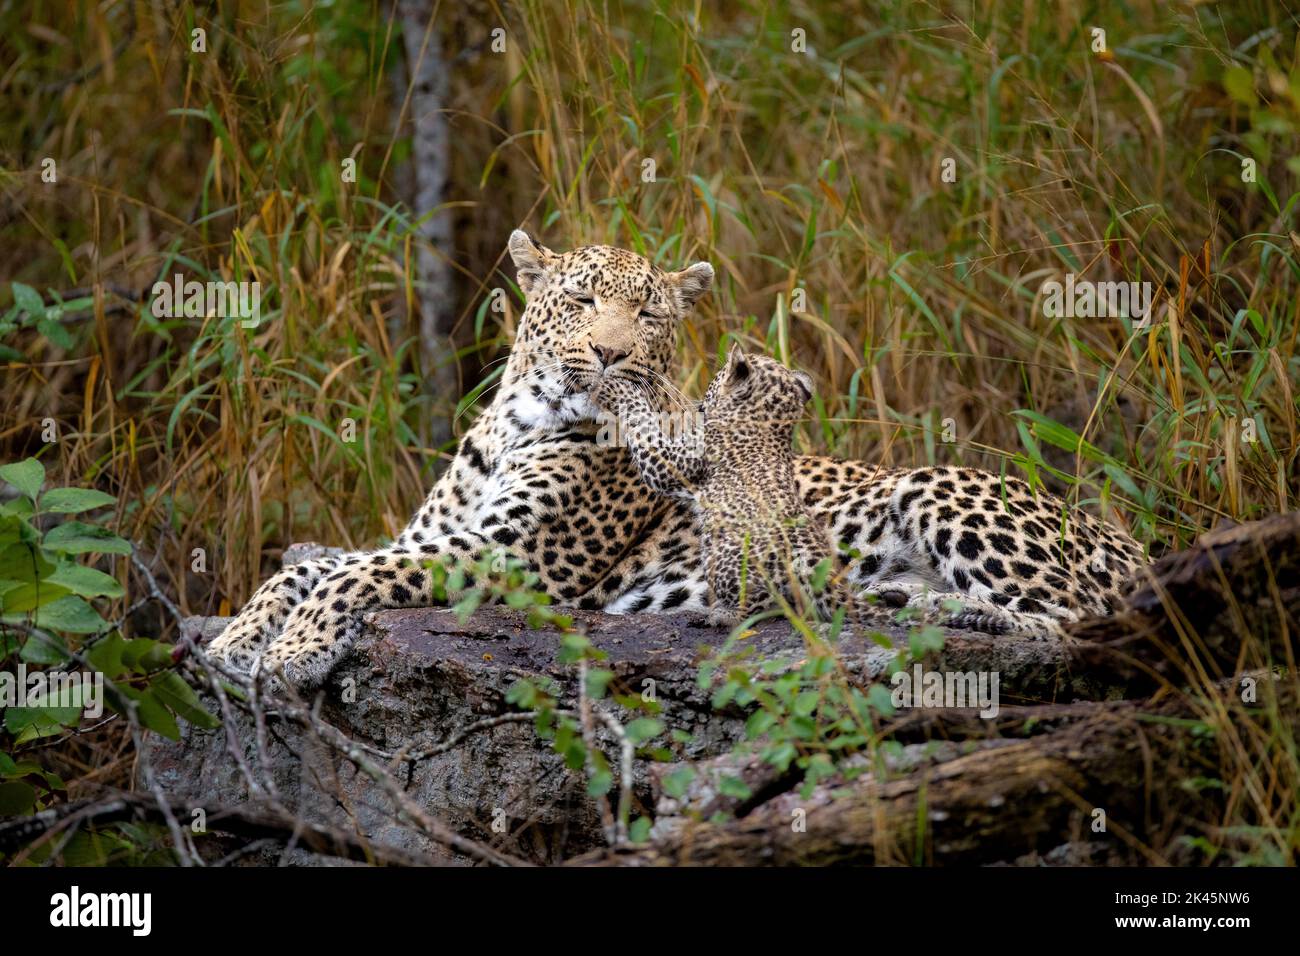 A female leopard and her cub, Panthera pardus, lie together on a log, cub puts its paws on her face Stock Photo